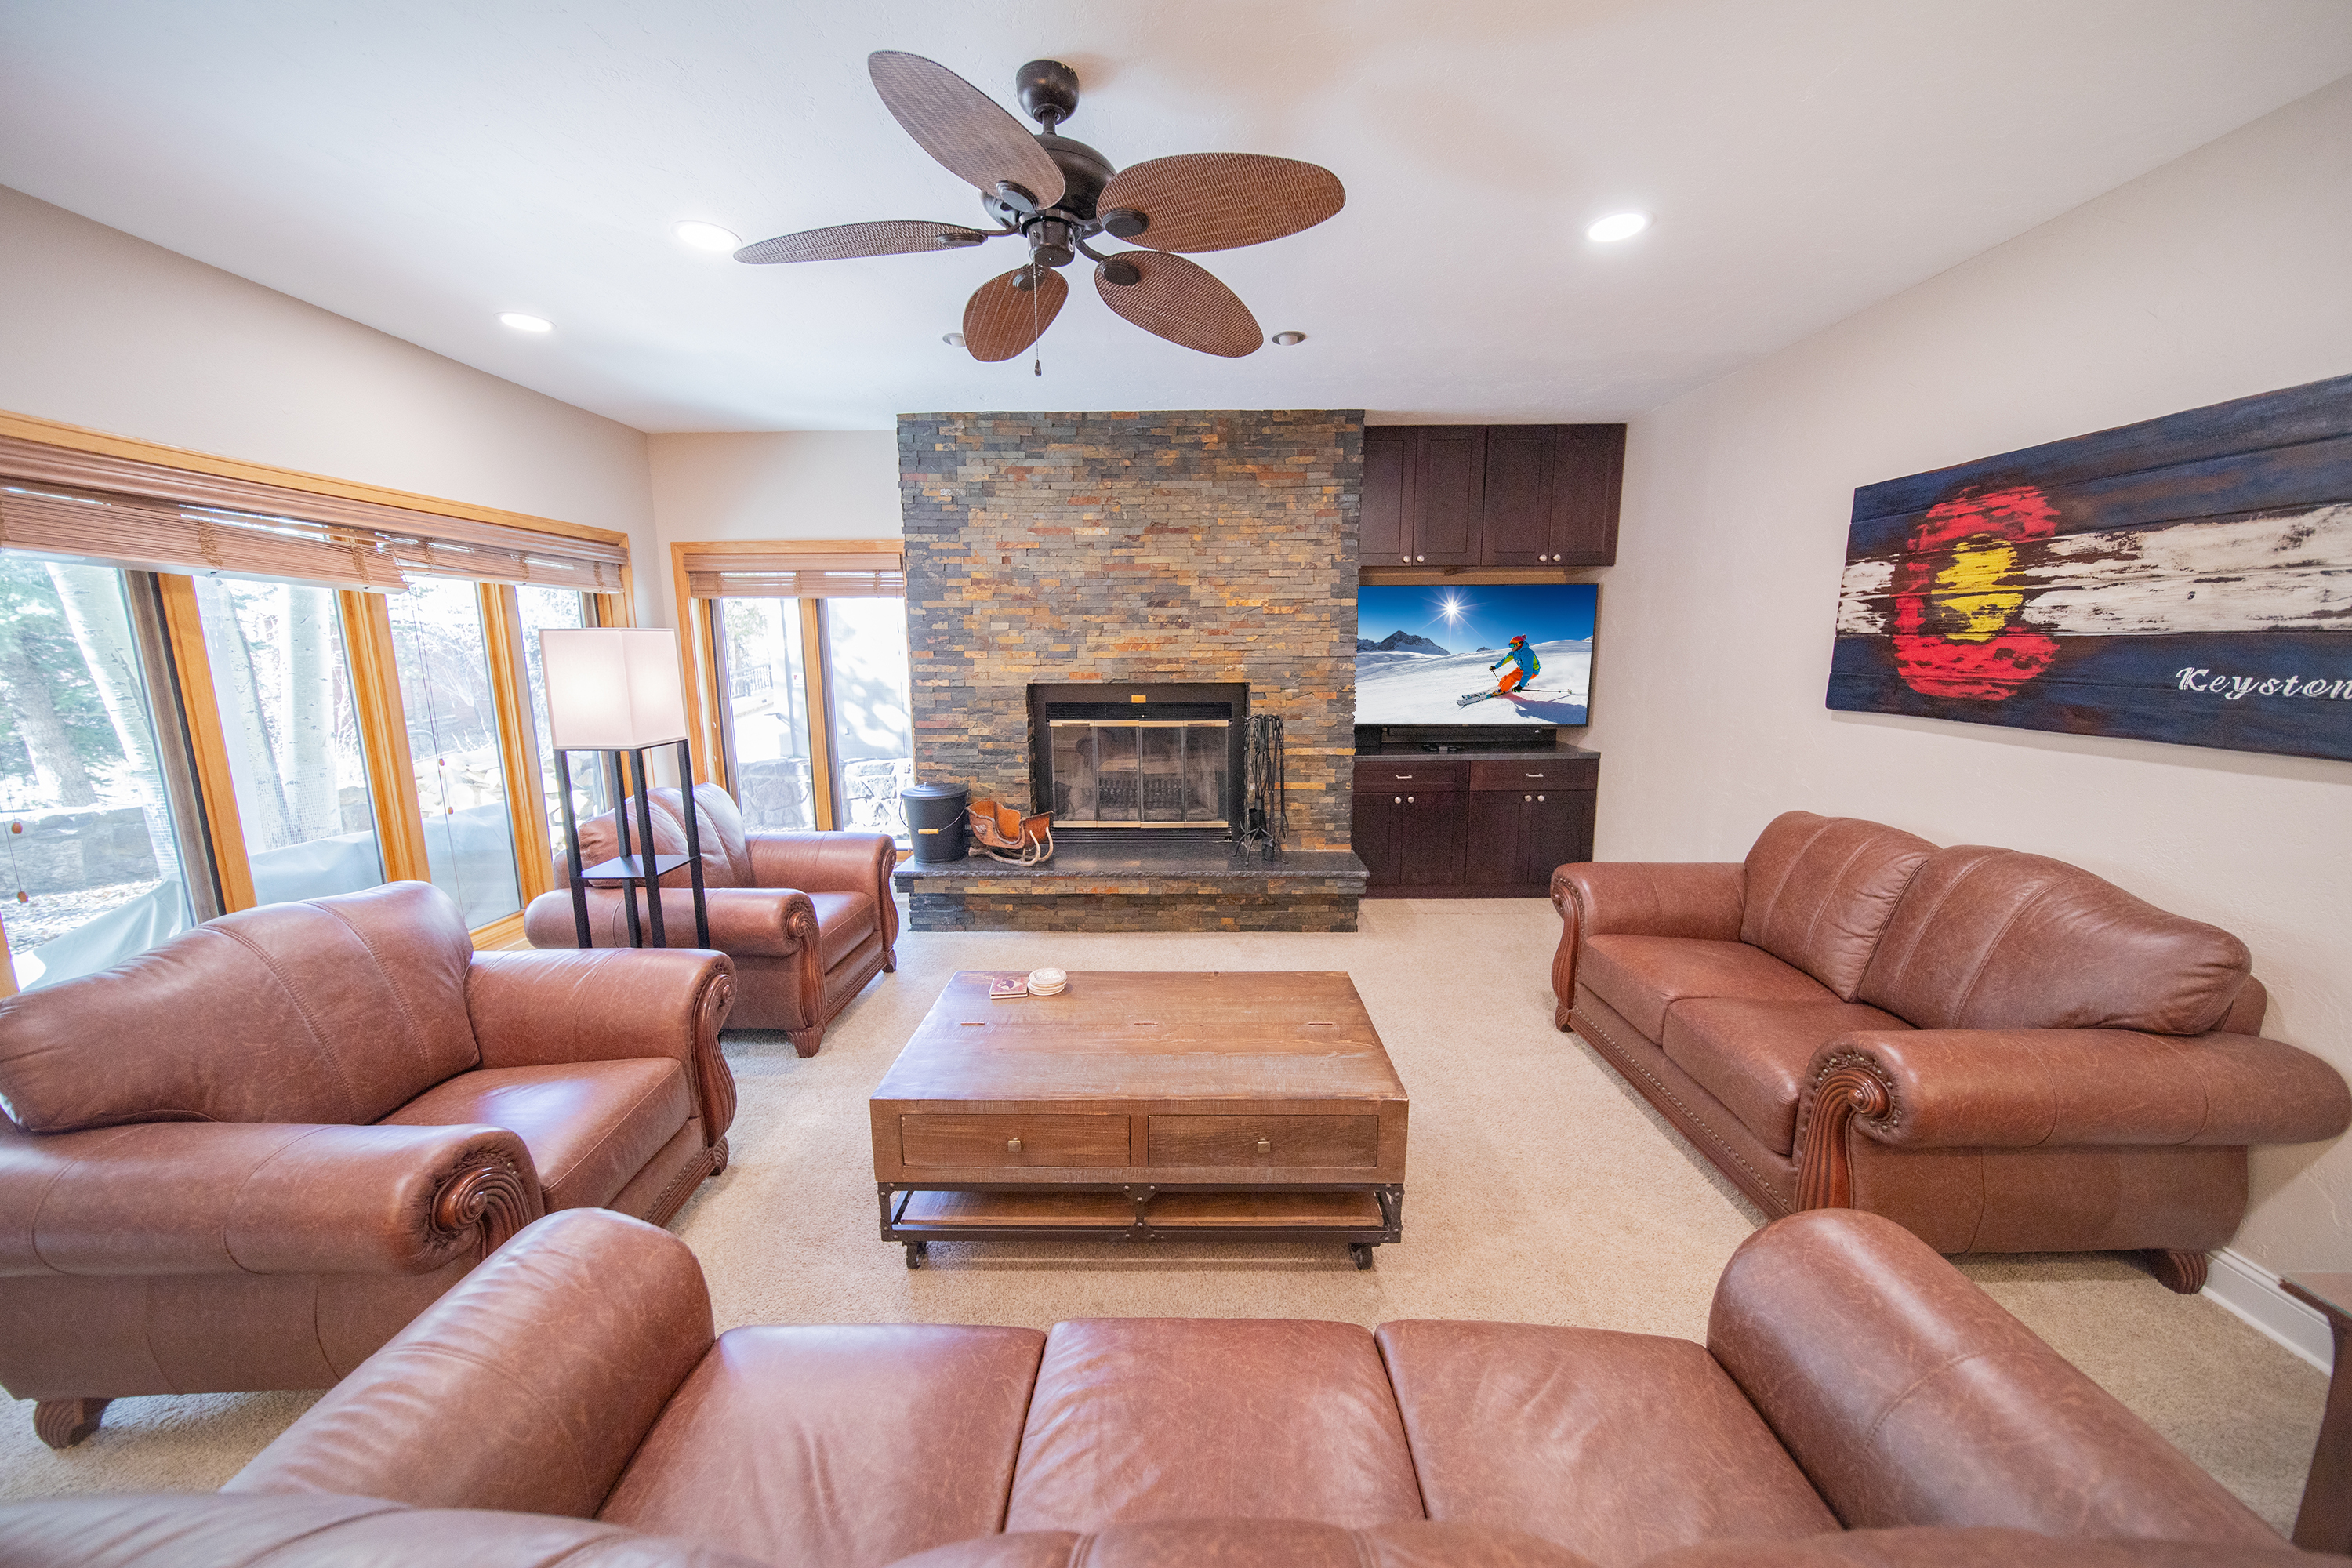 Fall in love with this amazing ski vacation condo!